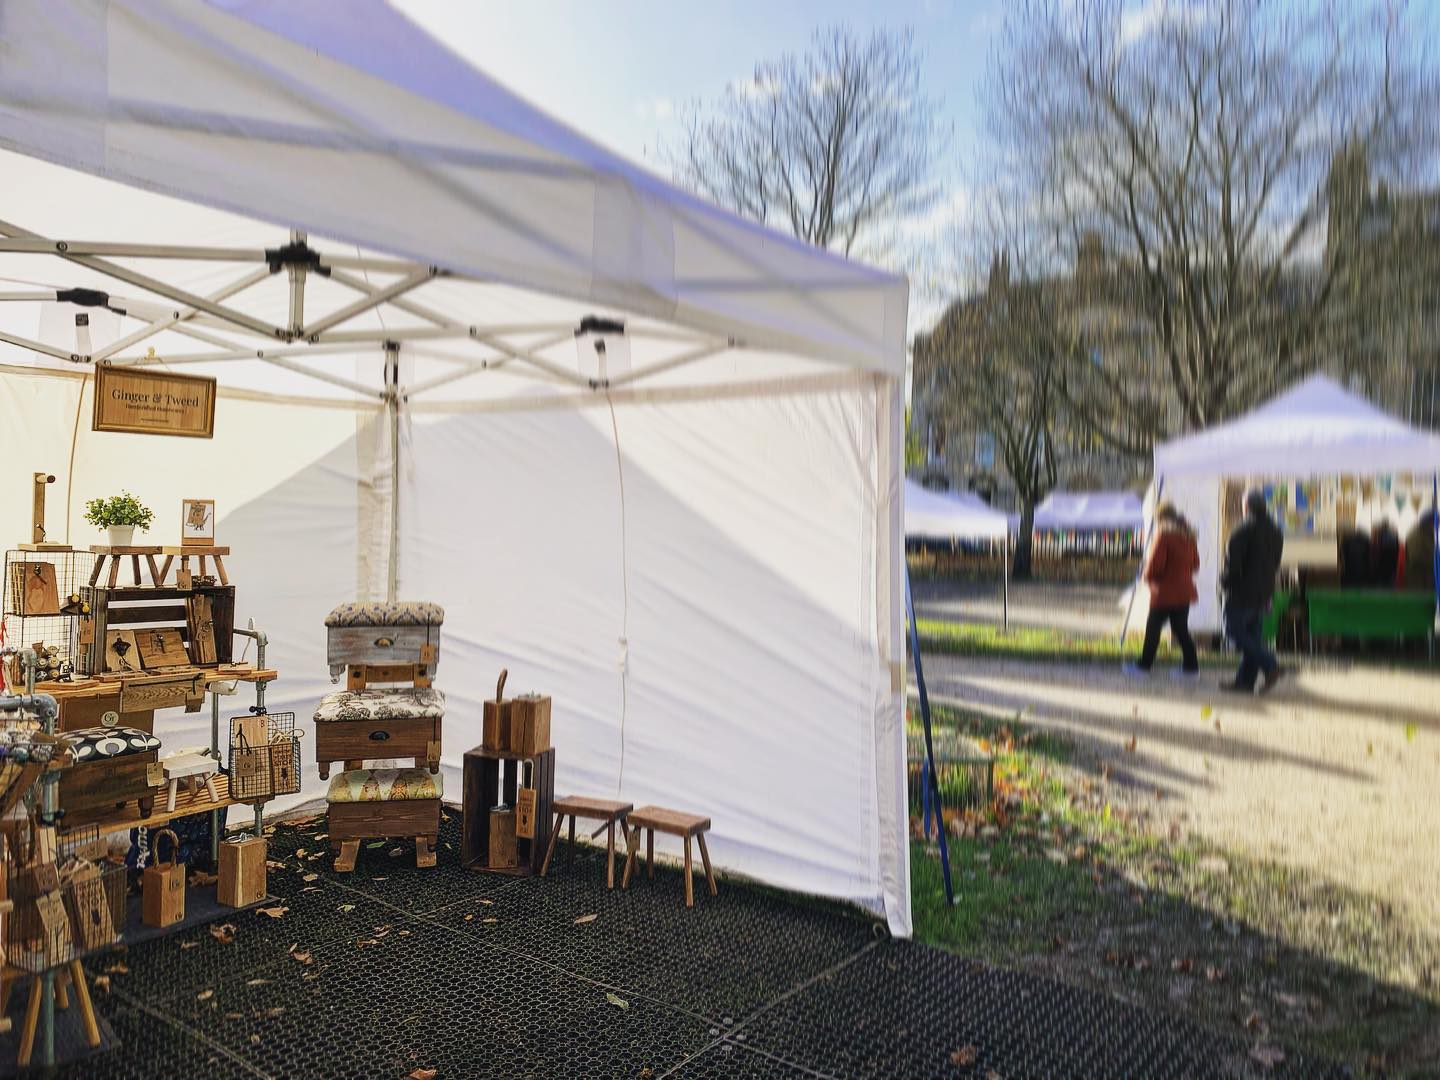 Head over to Queen Square this weekend for the @bathartisan Christmas Market. Slightly smaller today but still lots to browse!It will be fully open tomorrow. Wrap up warm!